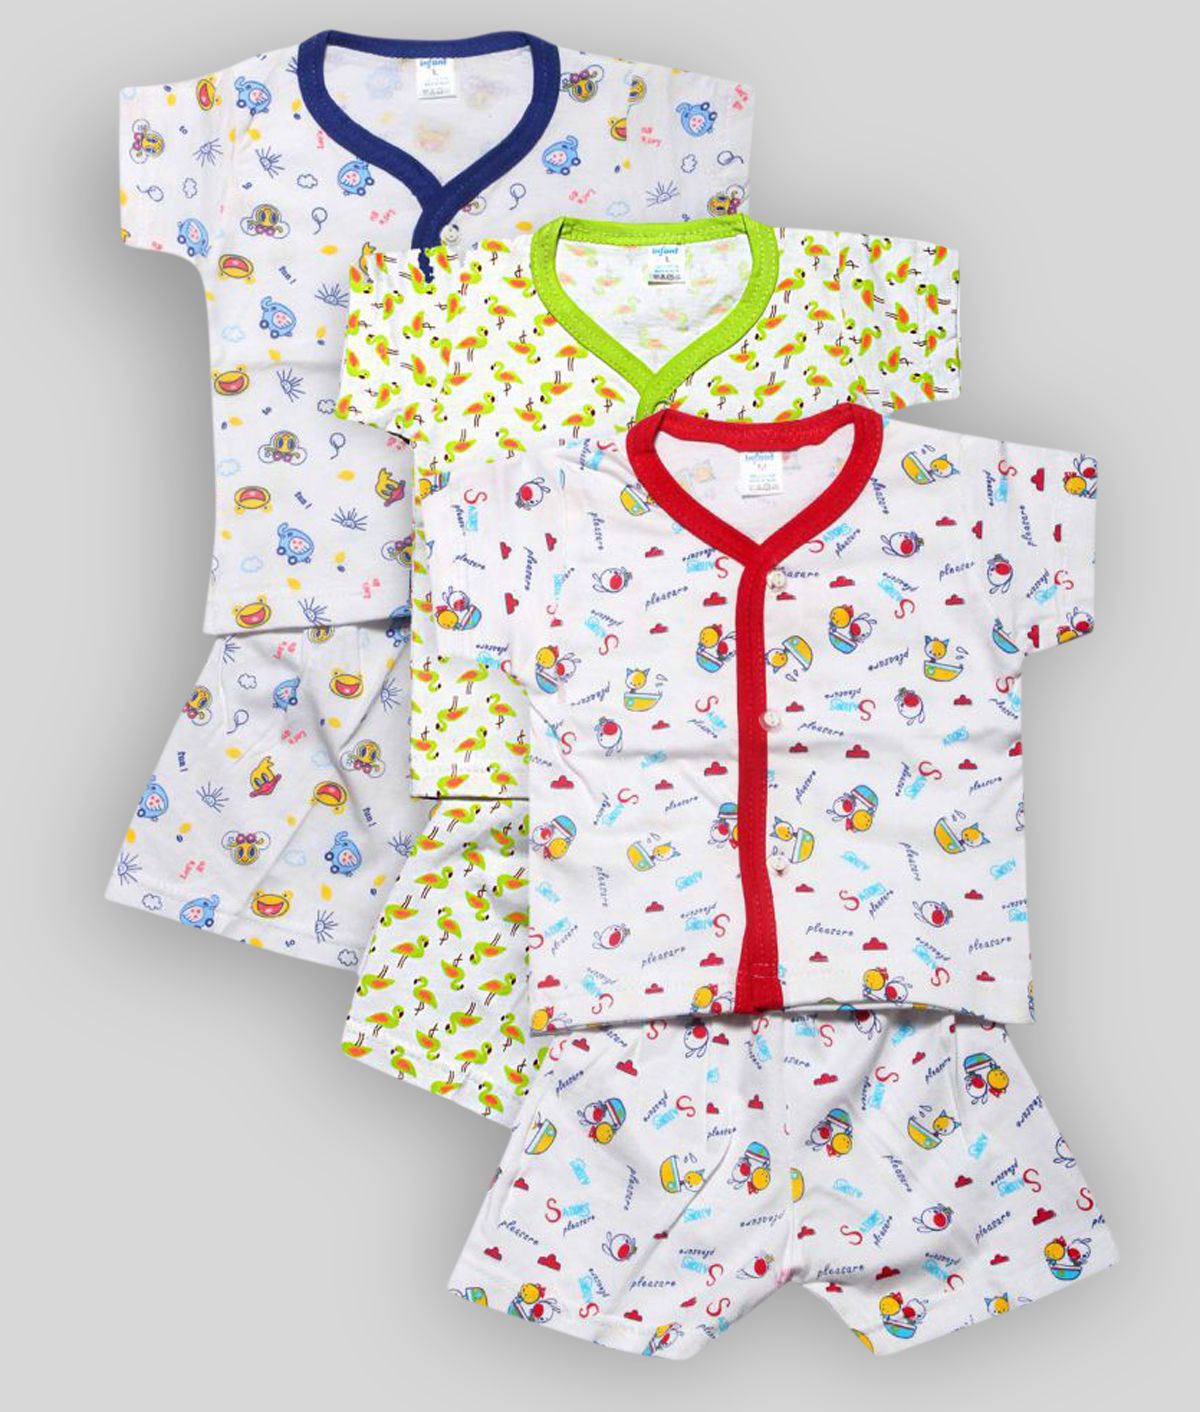     			INFANT - Multicolor Cotton T-Shirt & Shorts For Baby Boy ( Pack of 3 )